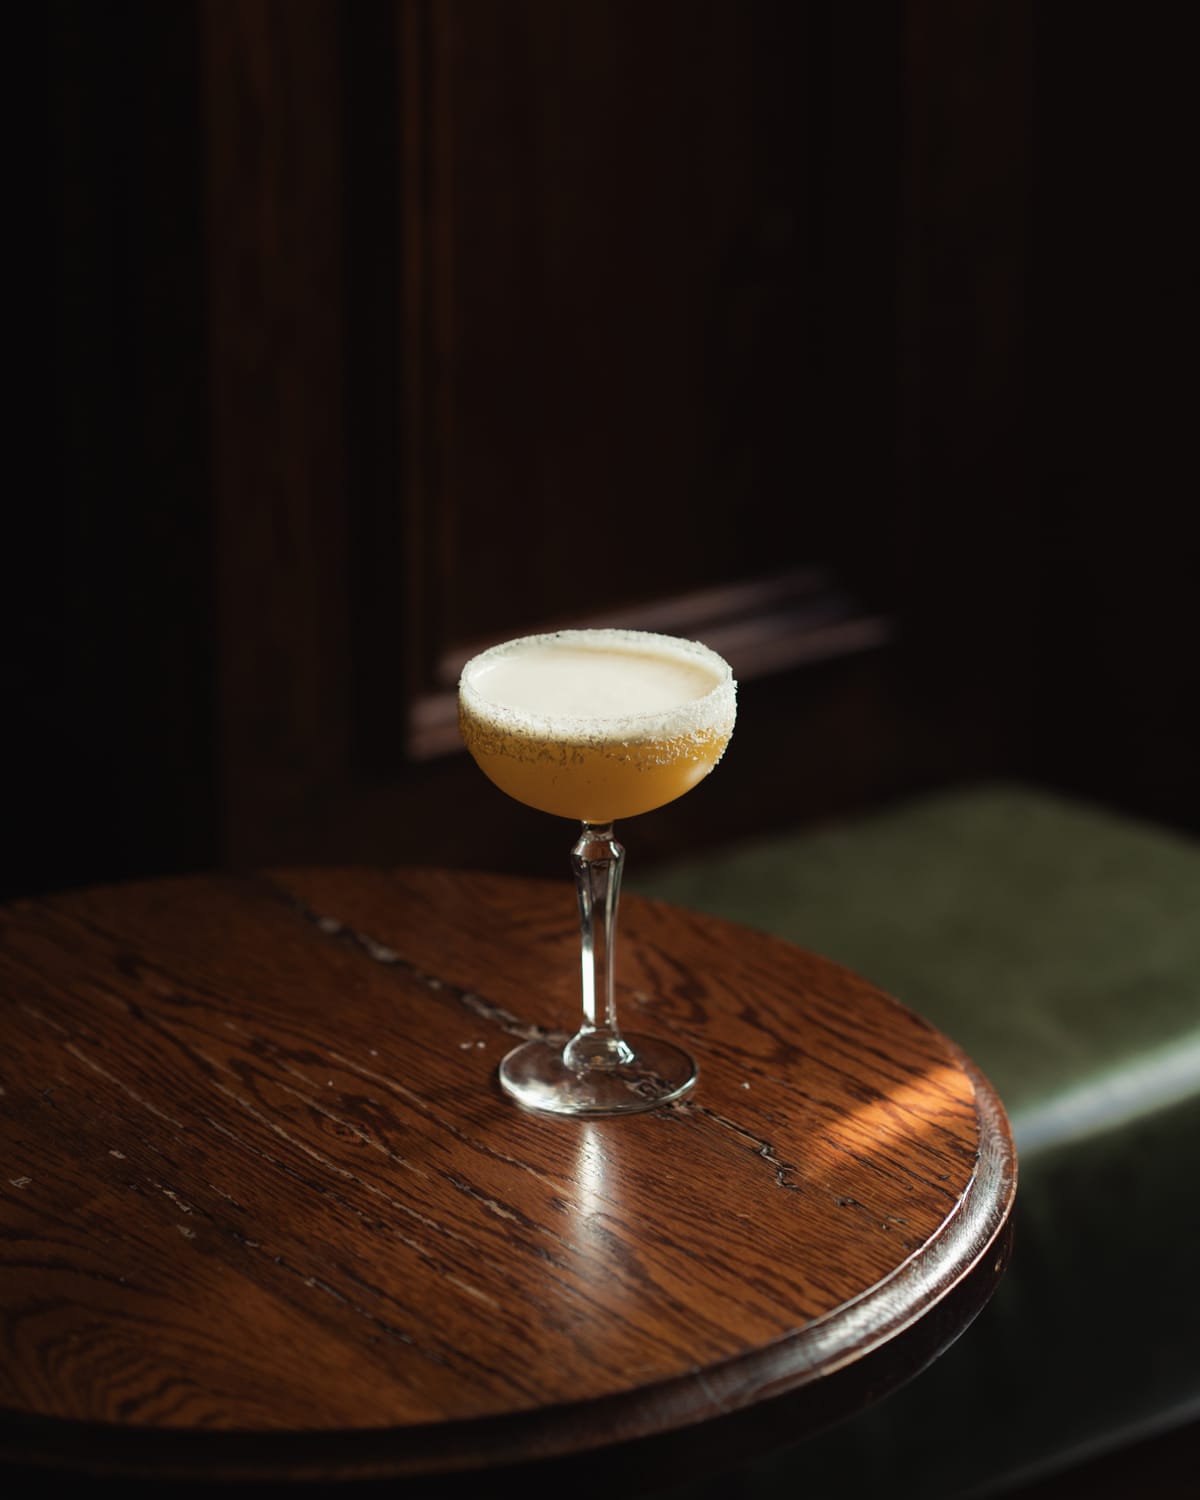 This Sunnyboy cocktail has been on The Gresham list for 10 years (with good reason)